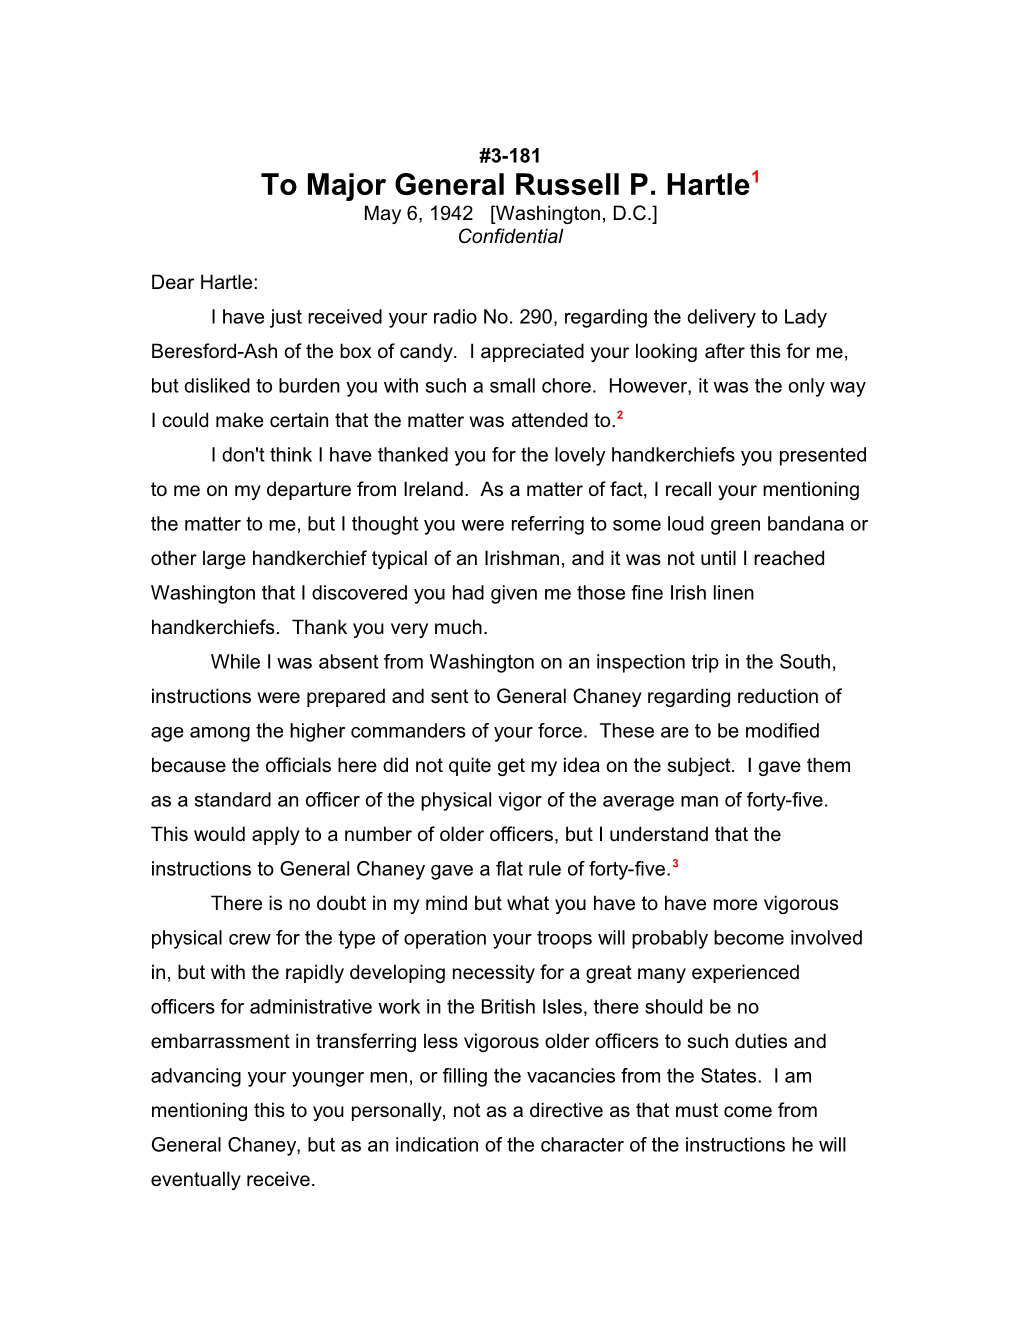 To Major General Russell P. Hartle1